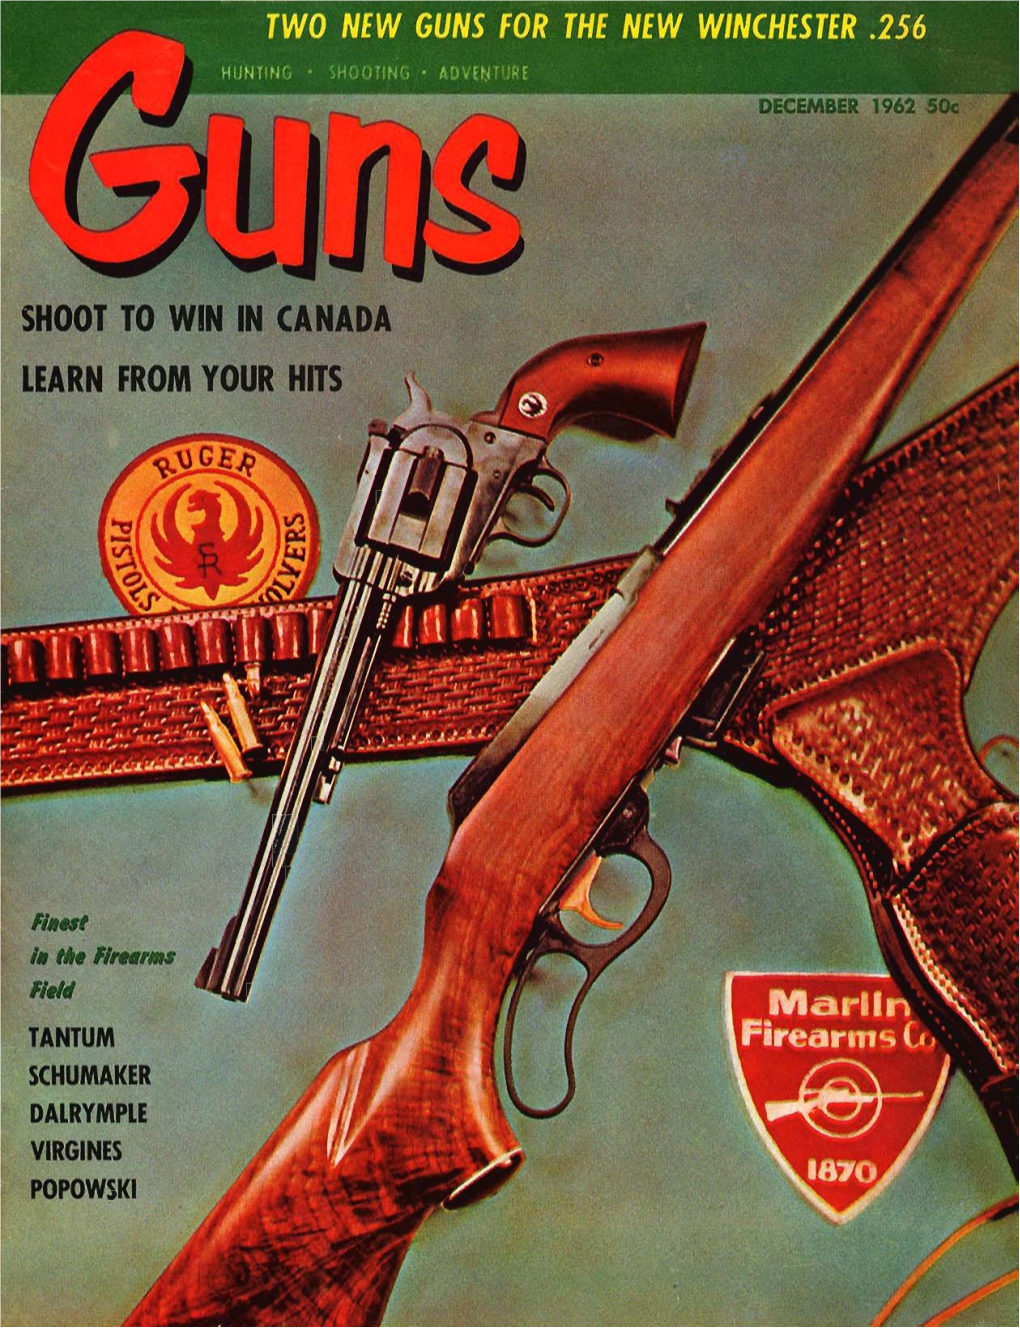 DECEMBER 1962 3 Area .A..::N" GUN LIBRARY Mm~~[Q)~ ~©©[}3 the ARCO GUN BOOK by Larry Koller Encyclopedia of All Hand and Shoulder Weap· Ons, Past and Present